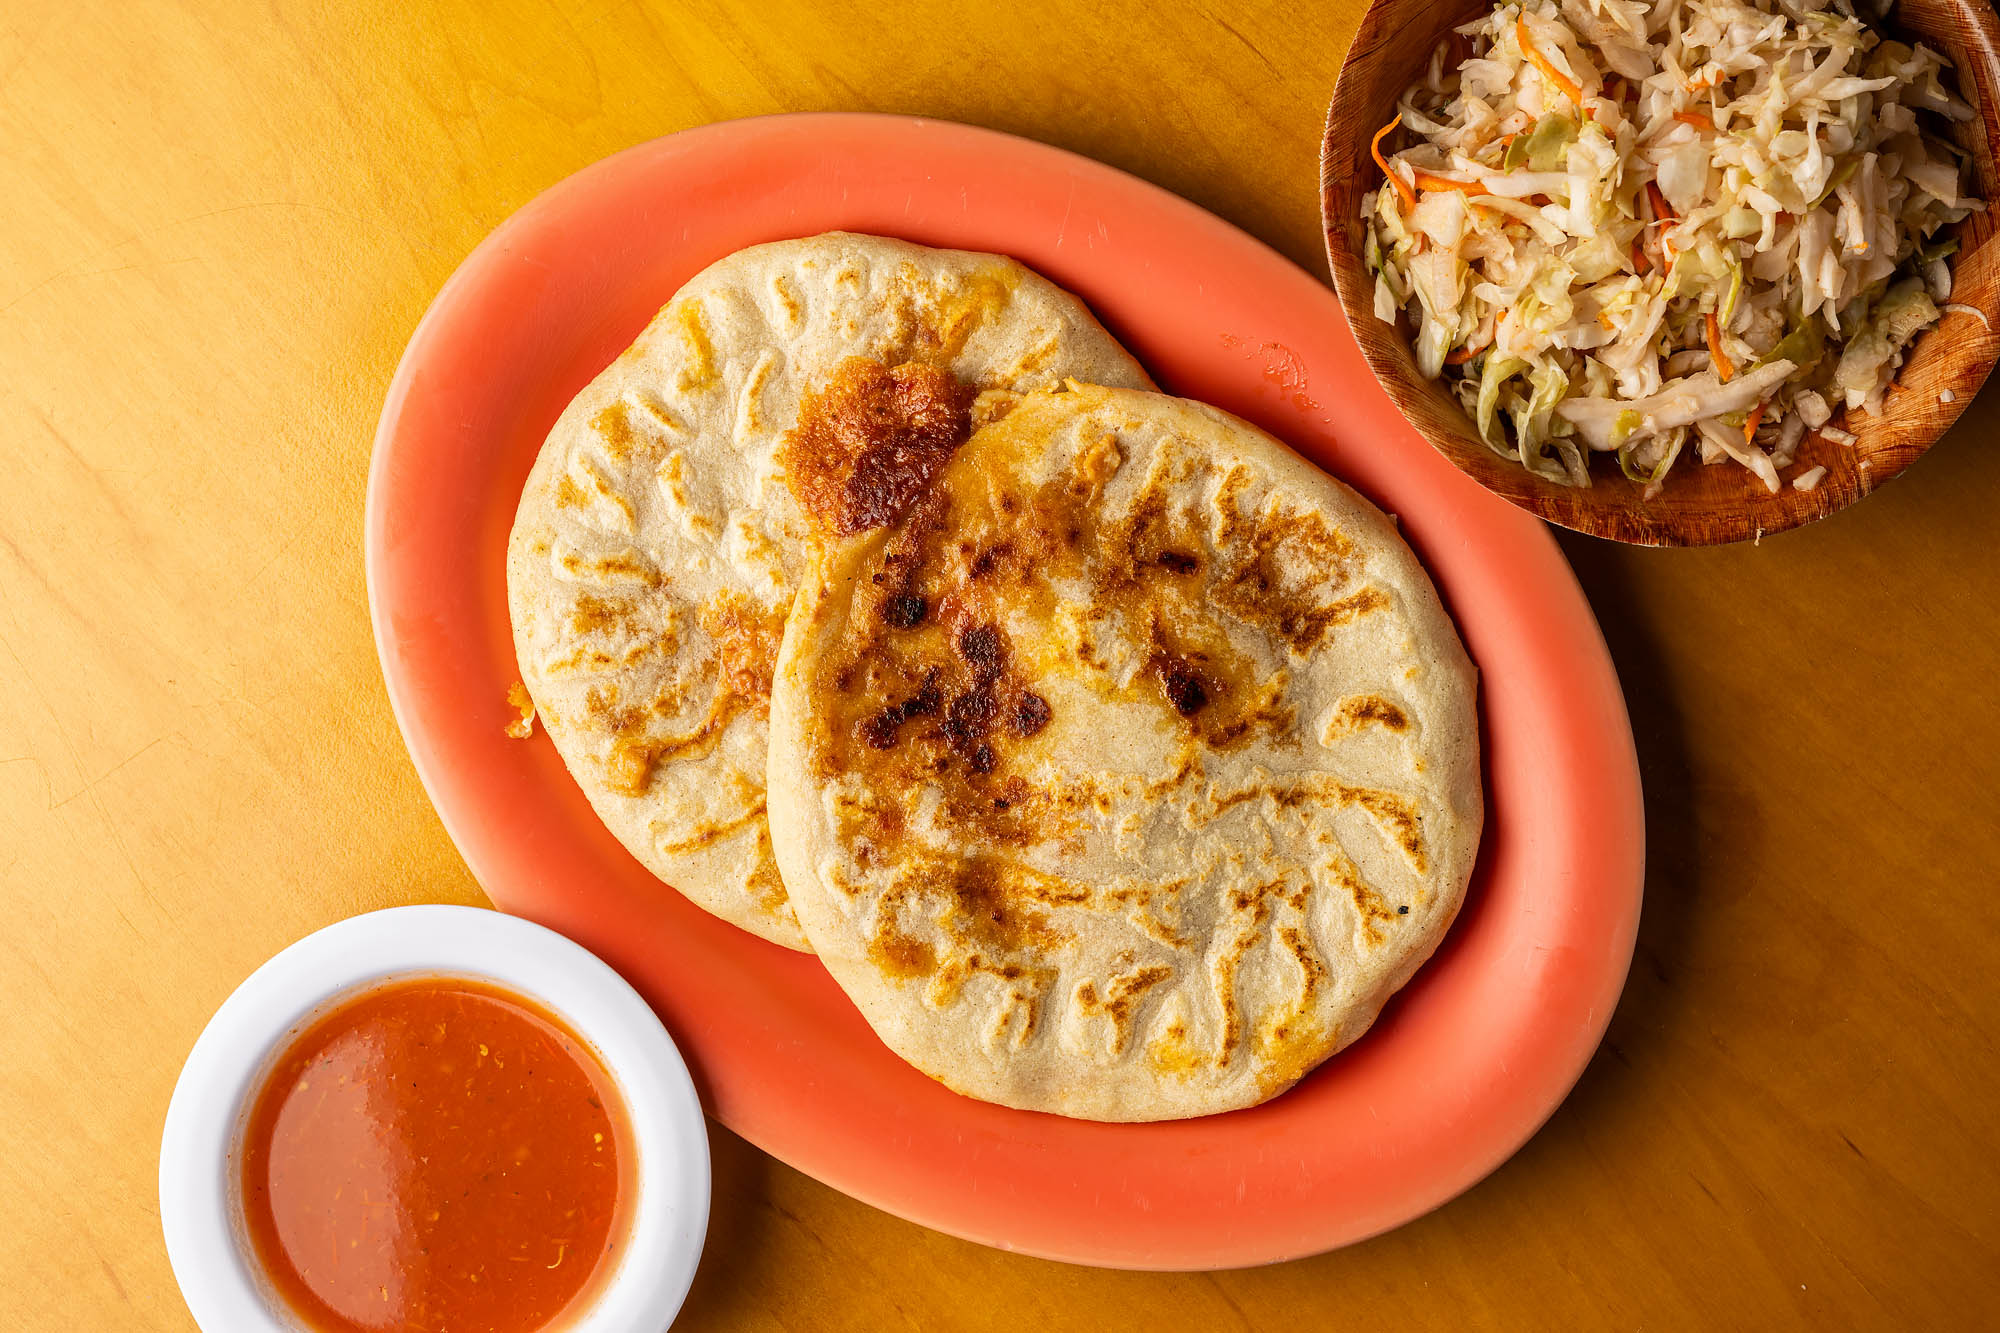 A plate of pupusas, plus salsa and curtido, on a table at Las Cazuelas.